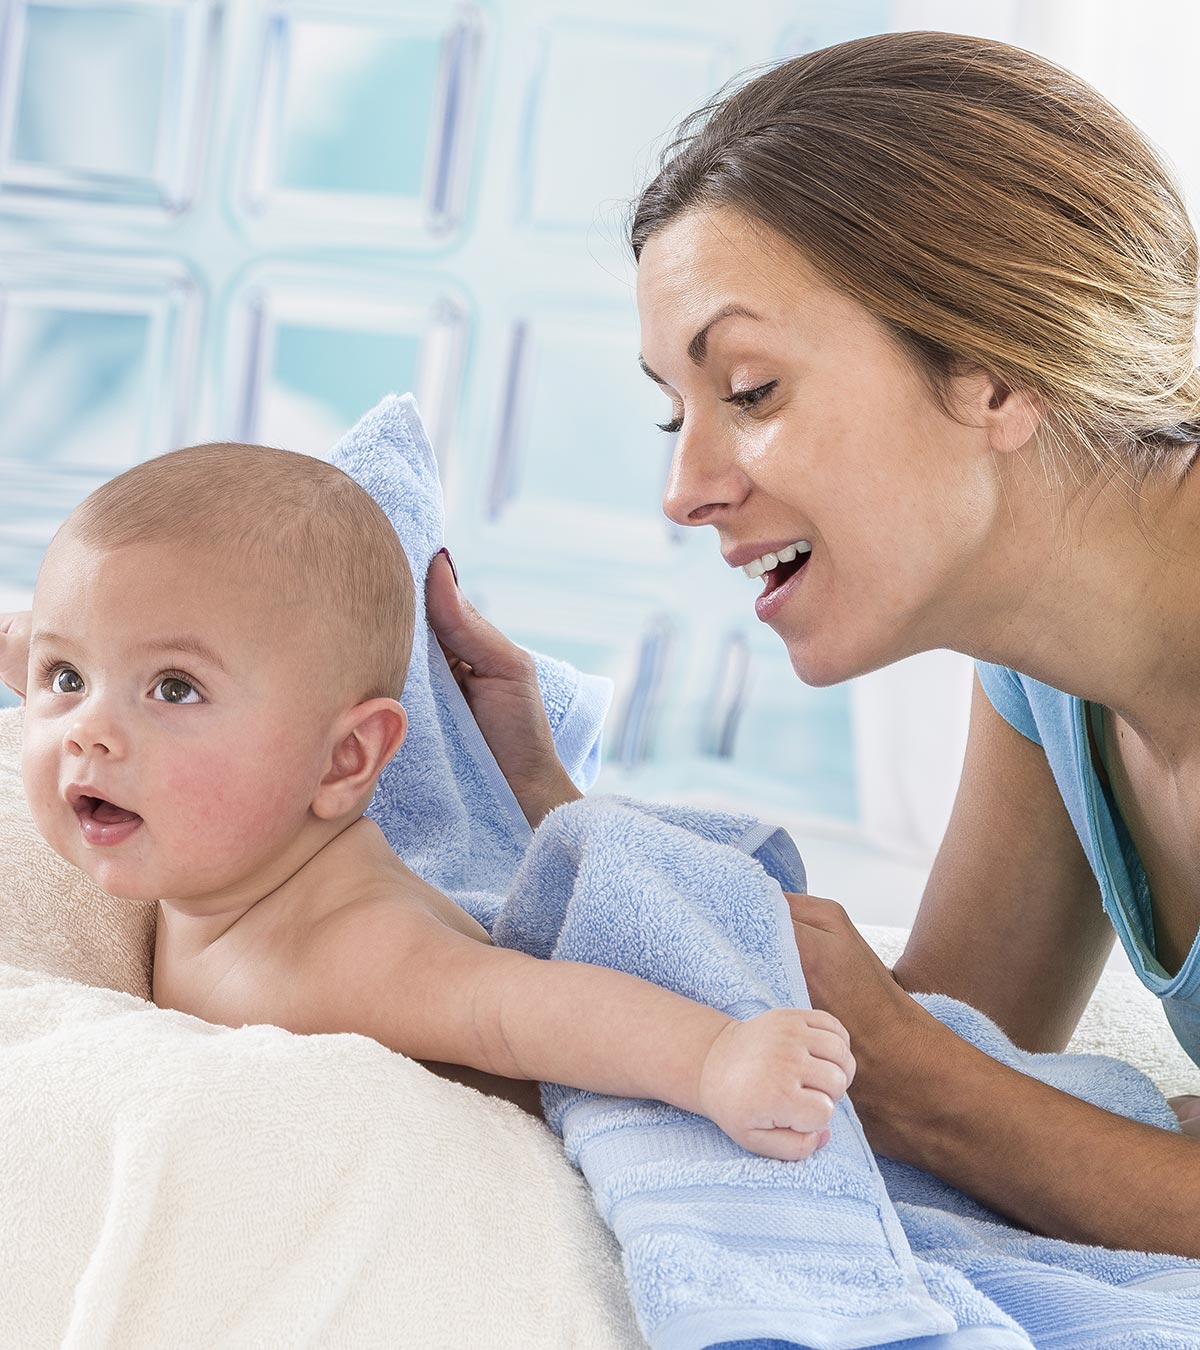 How To Bathe A Baby? Step-by-step Process And Safety Tips